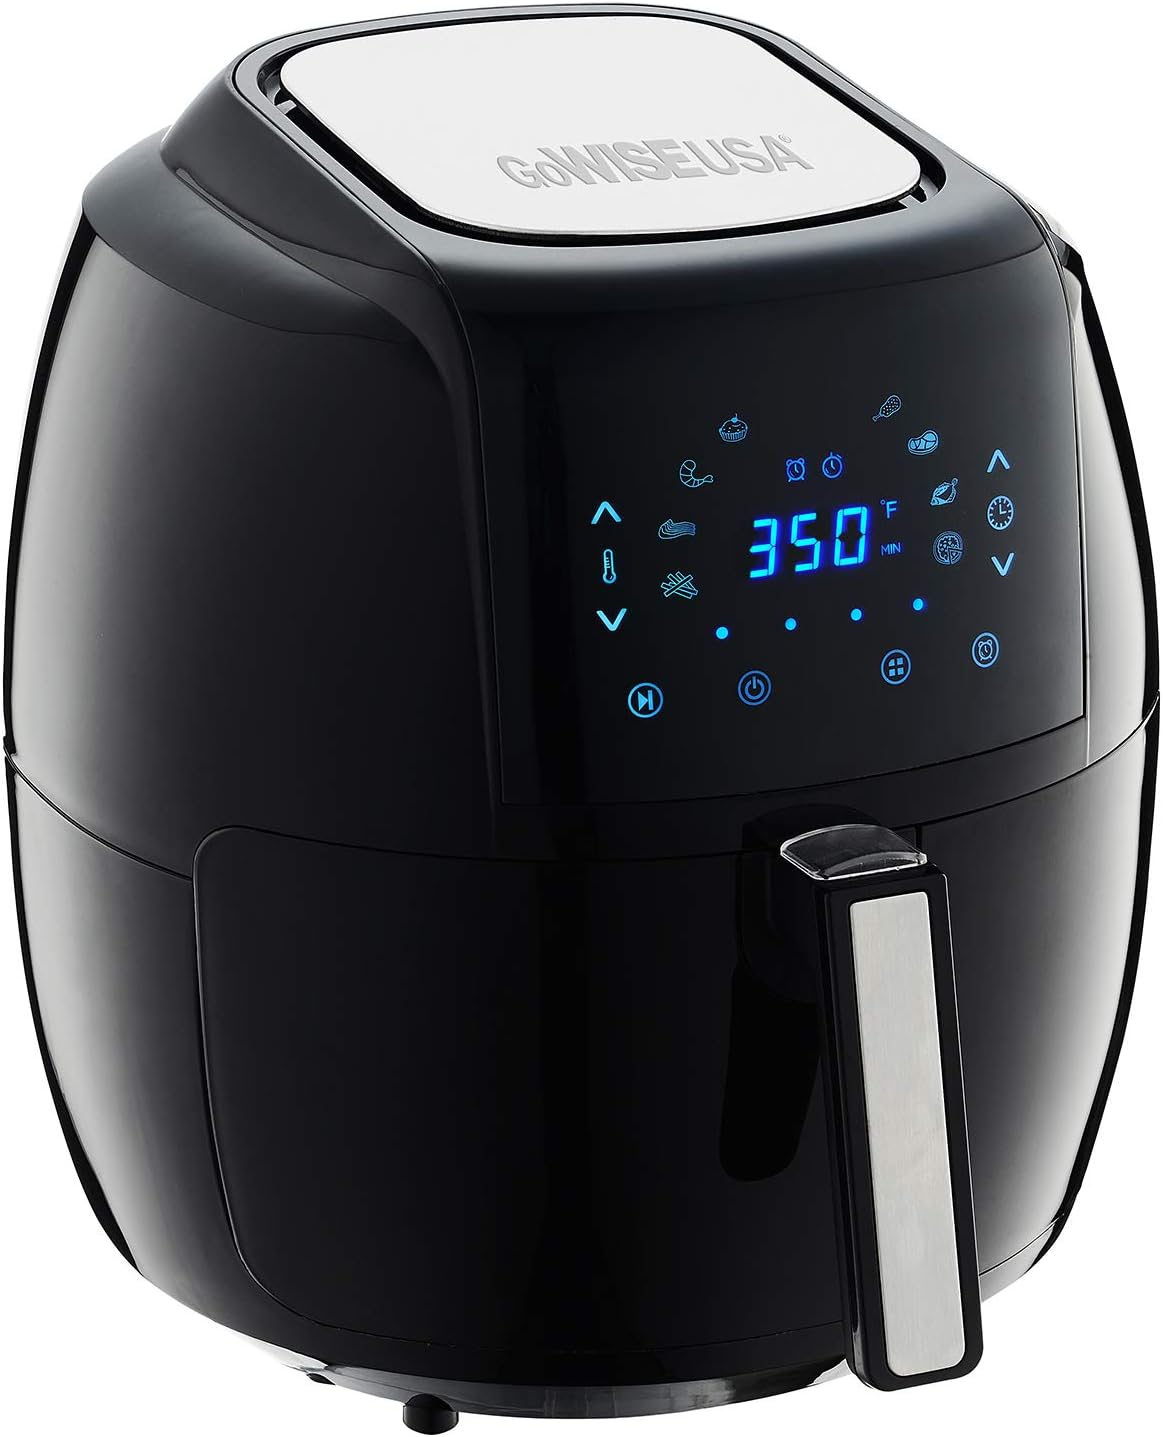  GoWISE USA Air Fryer 5.8-QT 